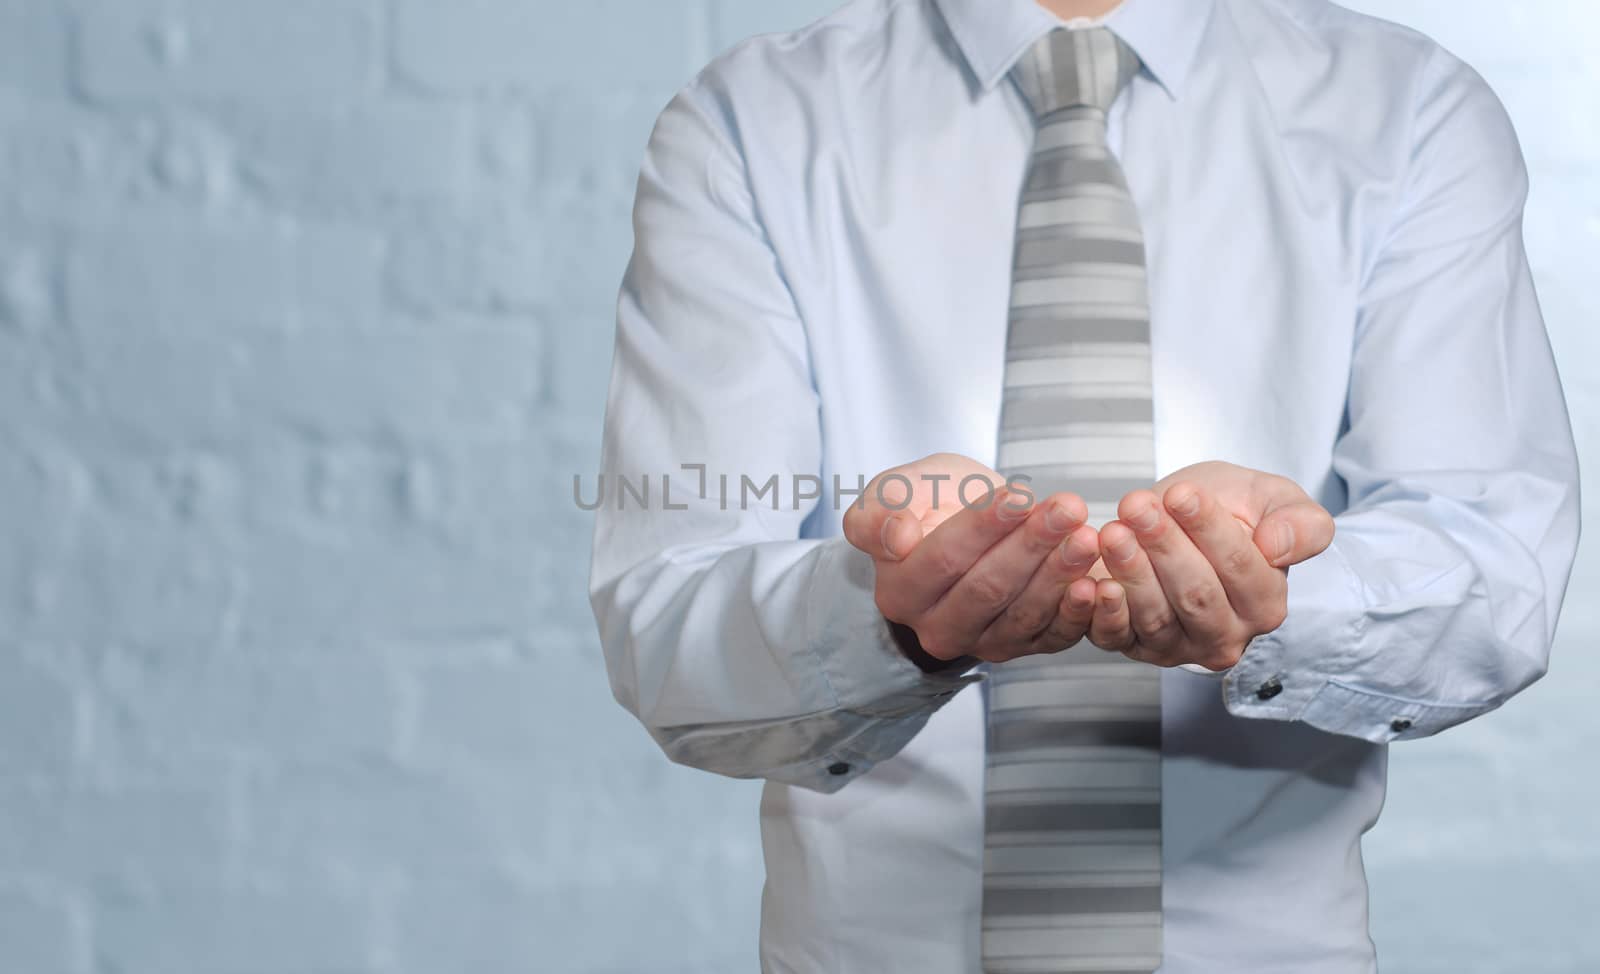 Businessman holding imaginary idea in hands - insert own concept